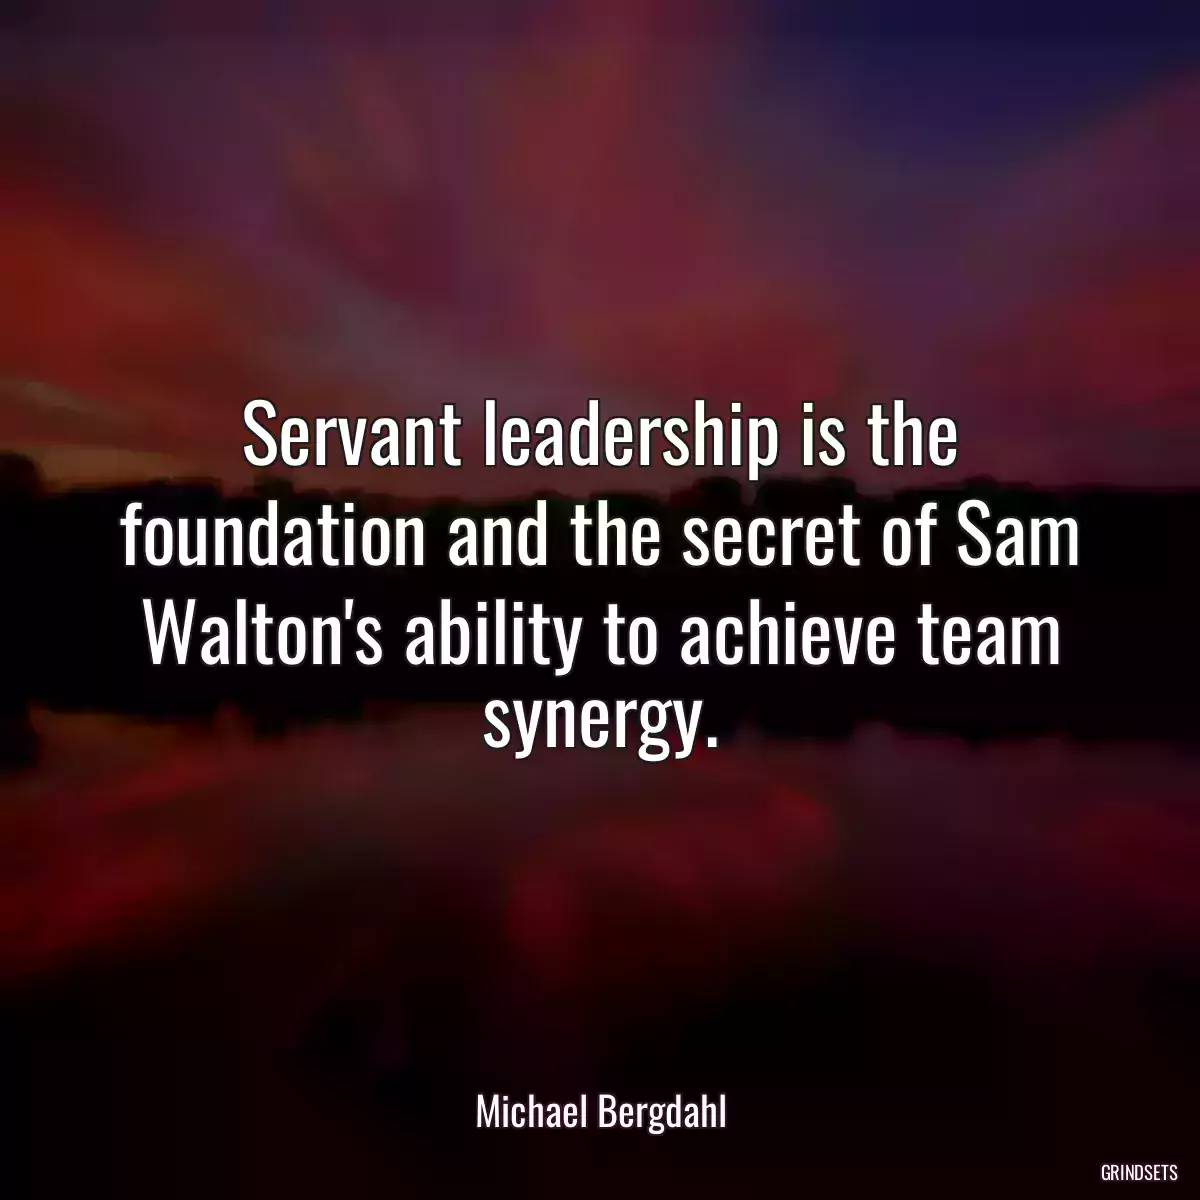 Servant leadership is the foundation and the secret of Sam Walton\'s ability to achieve team synergy.